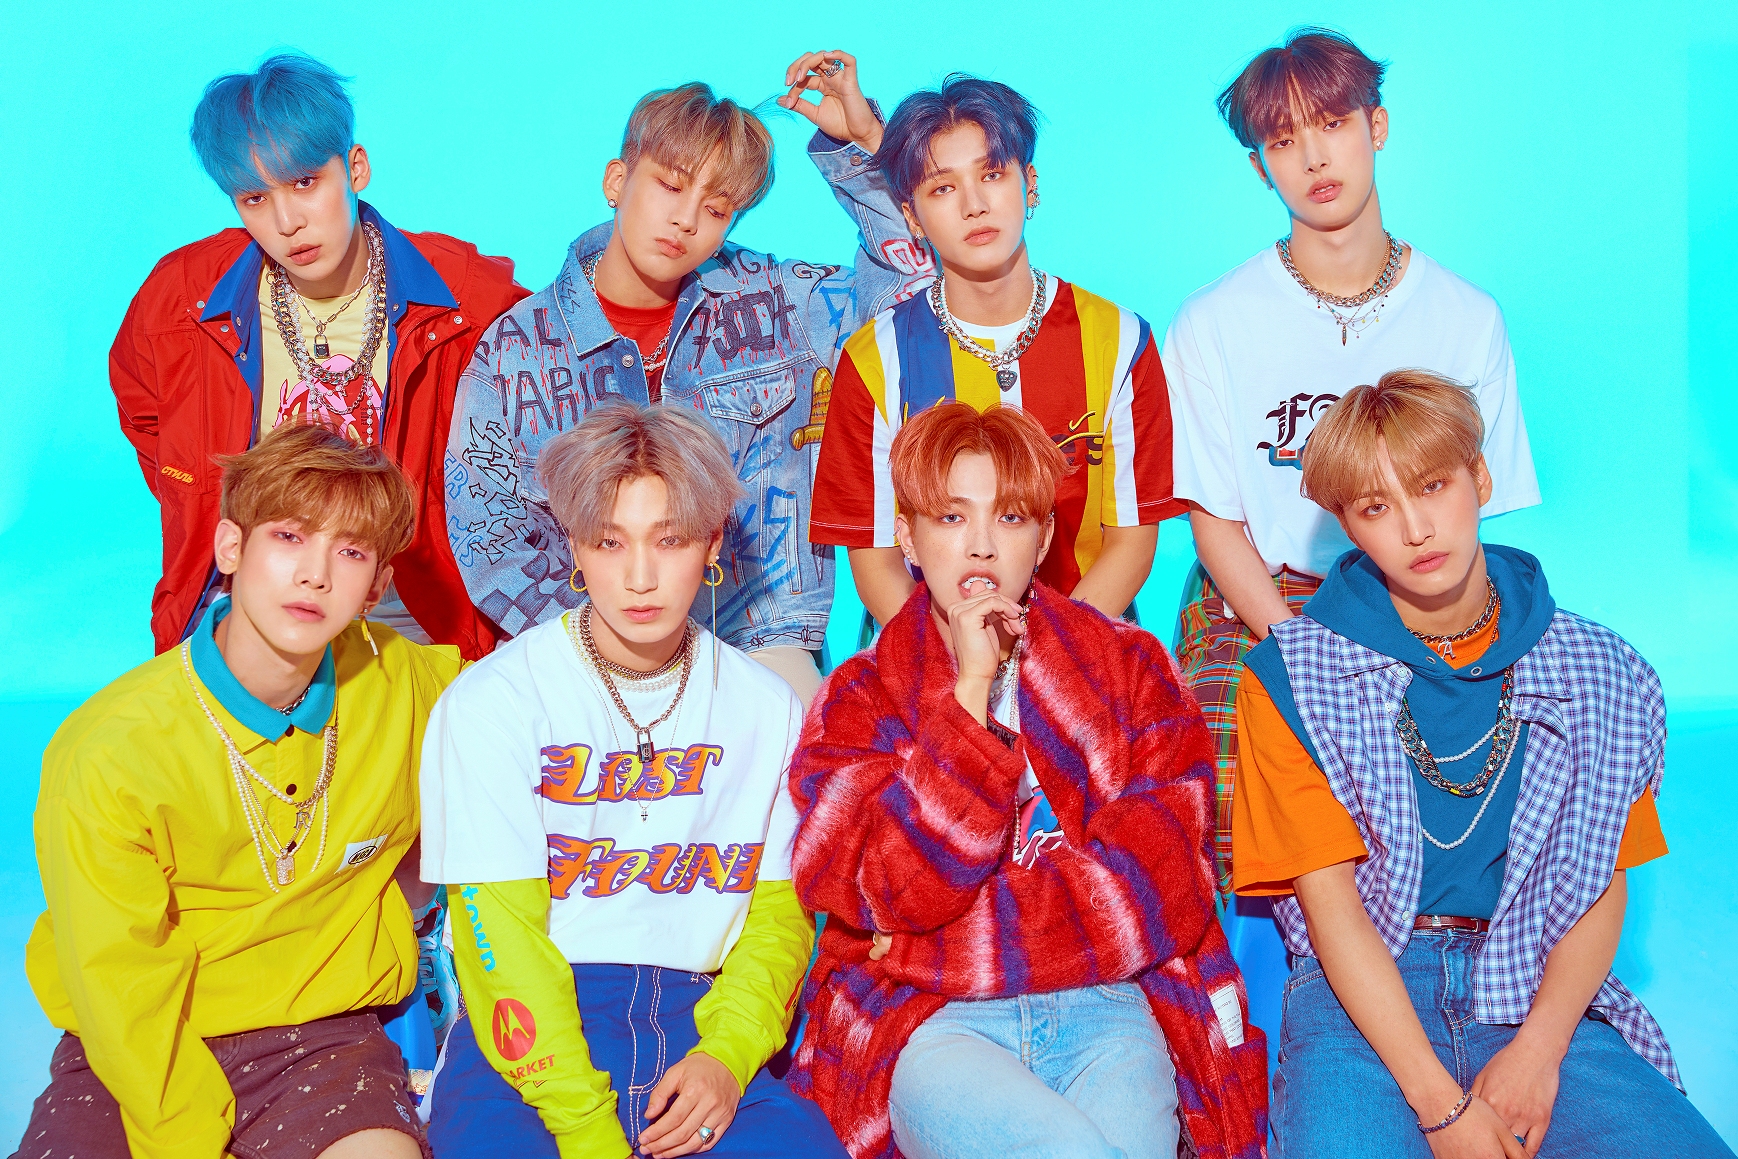 Fact Music Awards 2021 Lineup Revealed Performers’ List ft. BTS, Stray Kids, Ateez